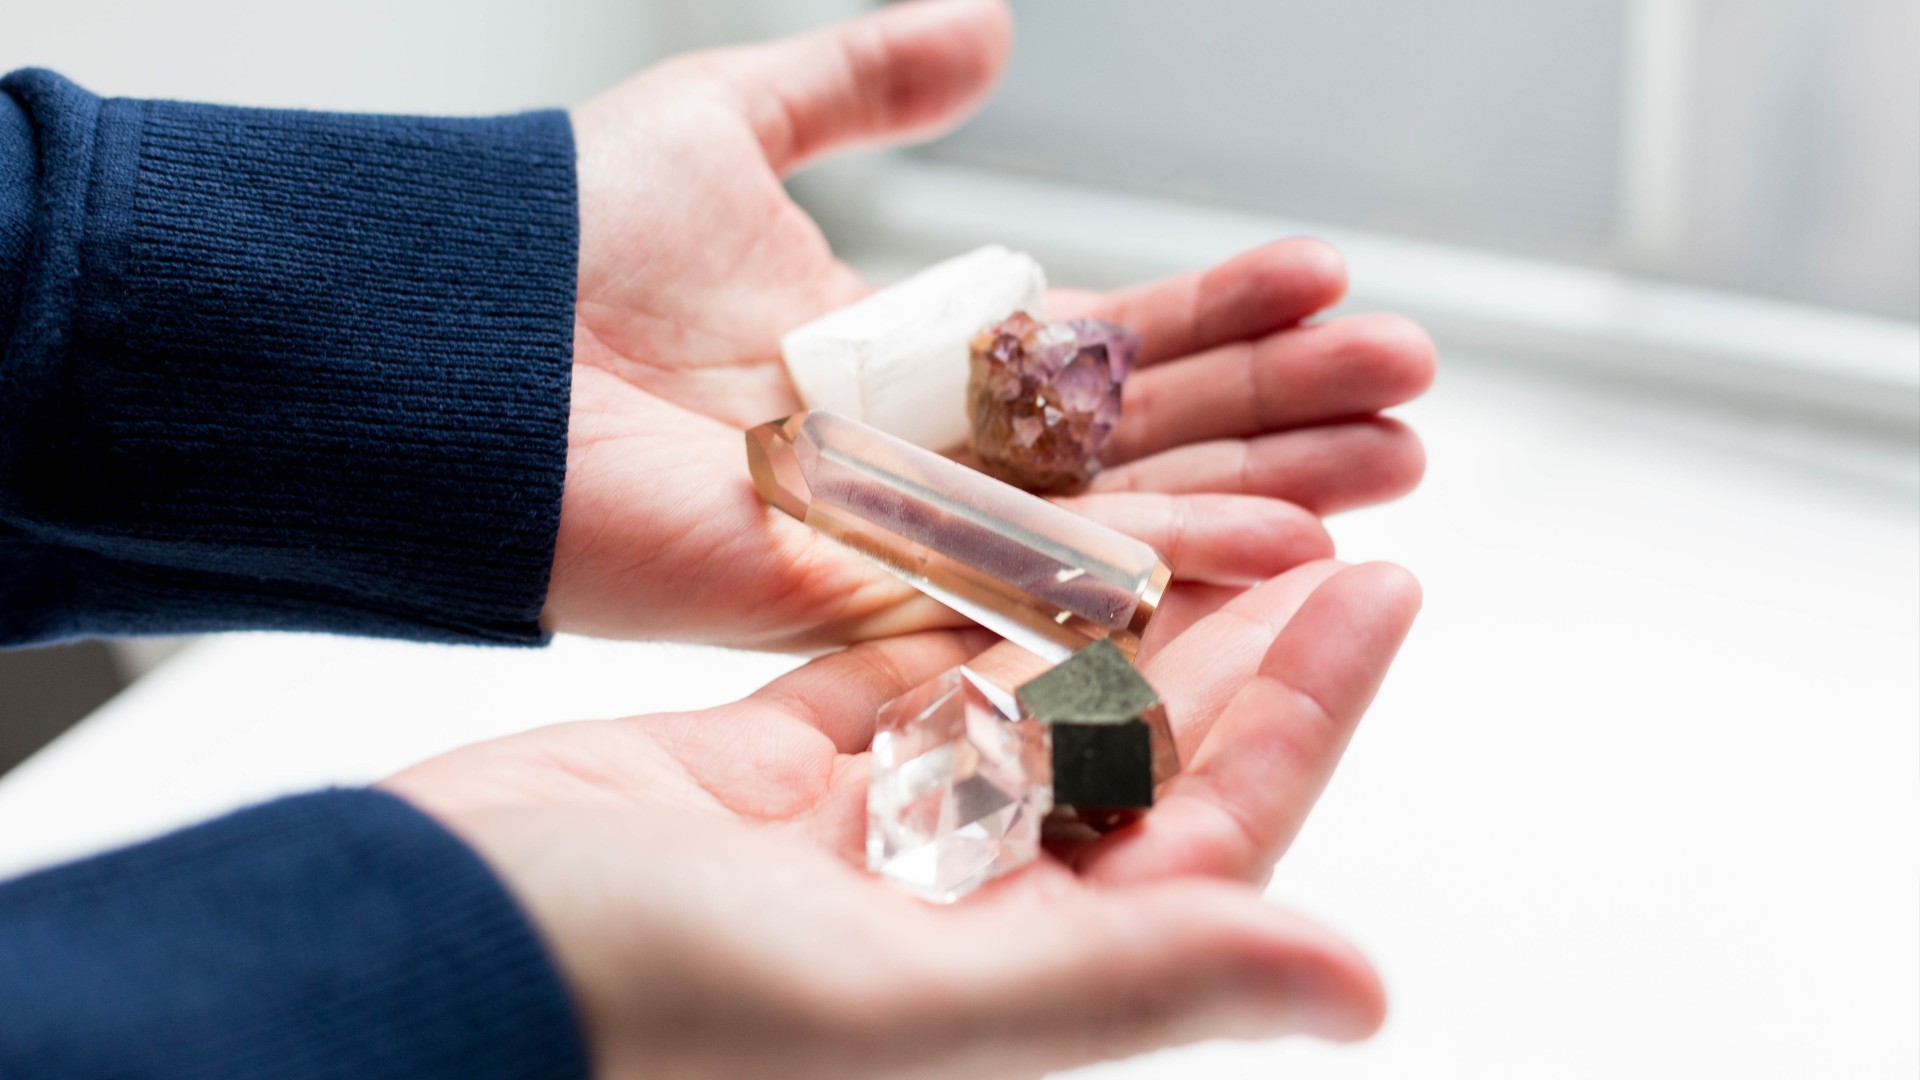 Crystal healing: Stone-cold facts about gemstone treatments